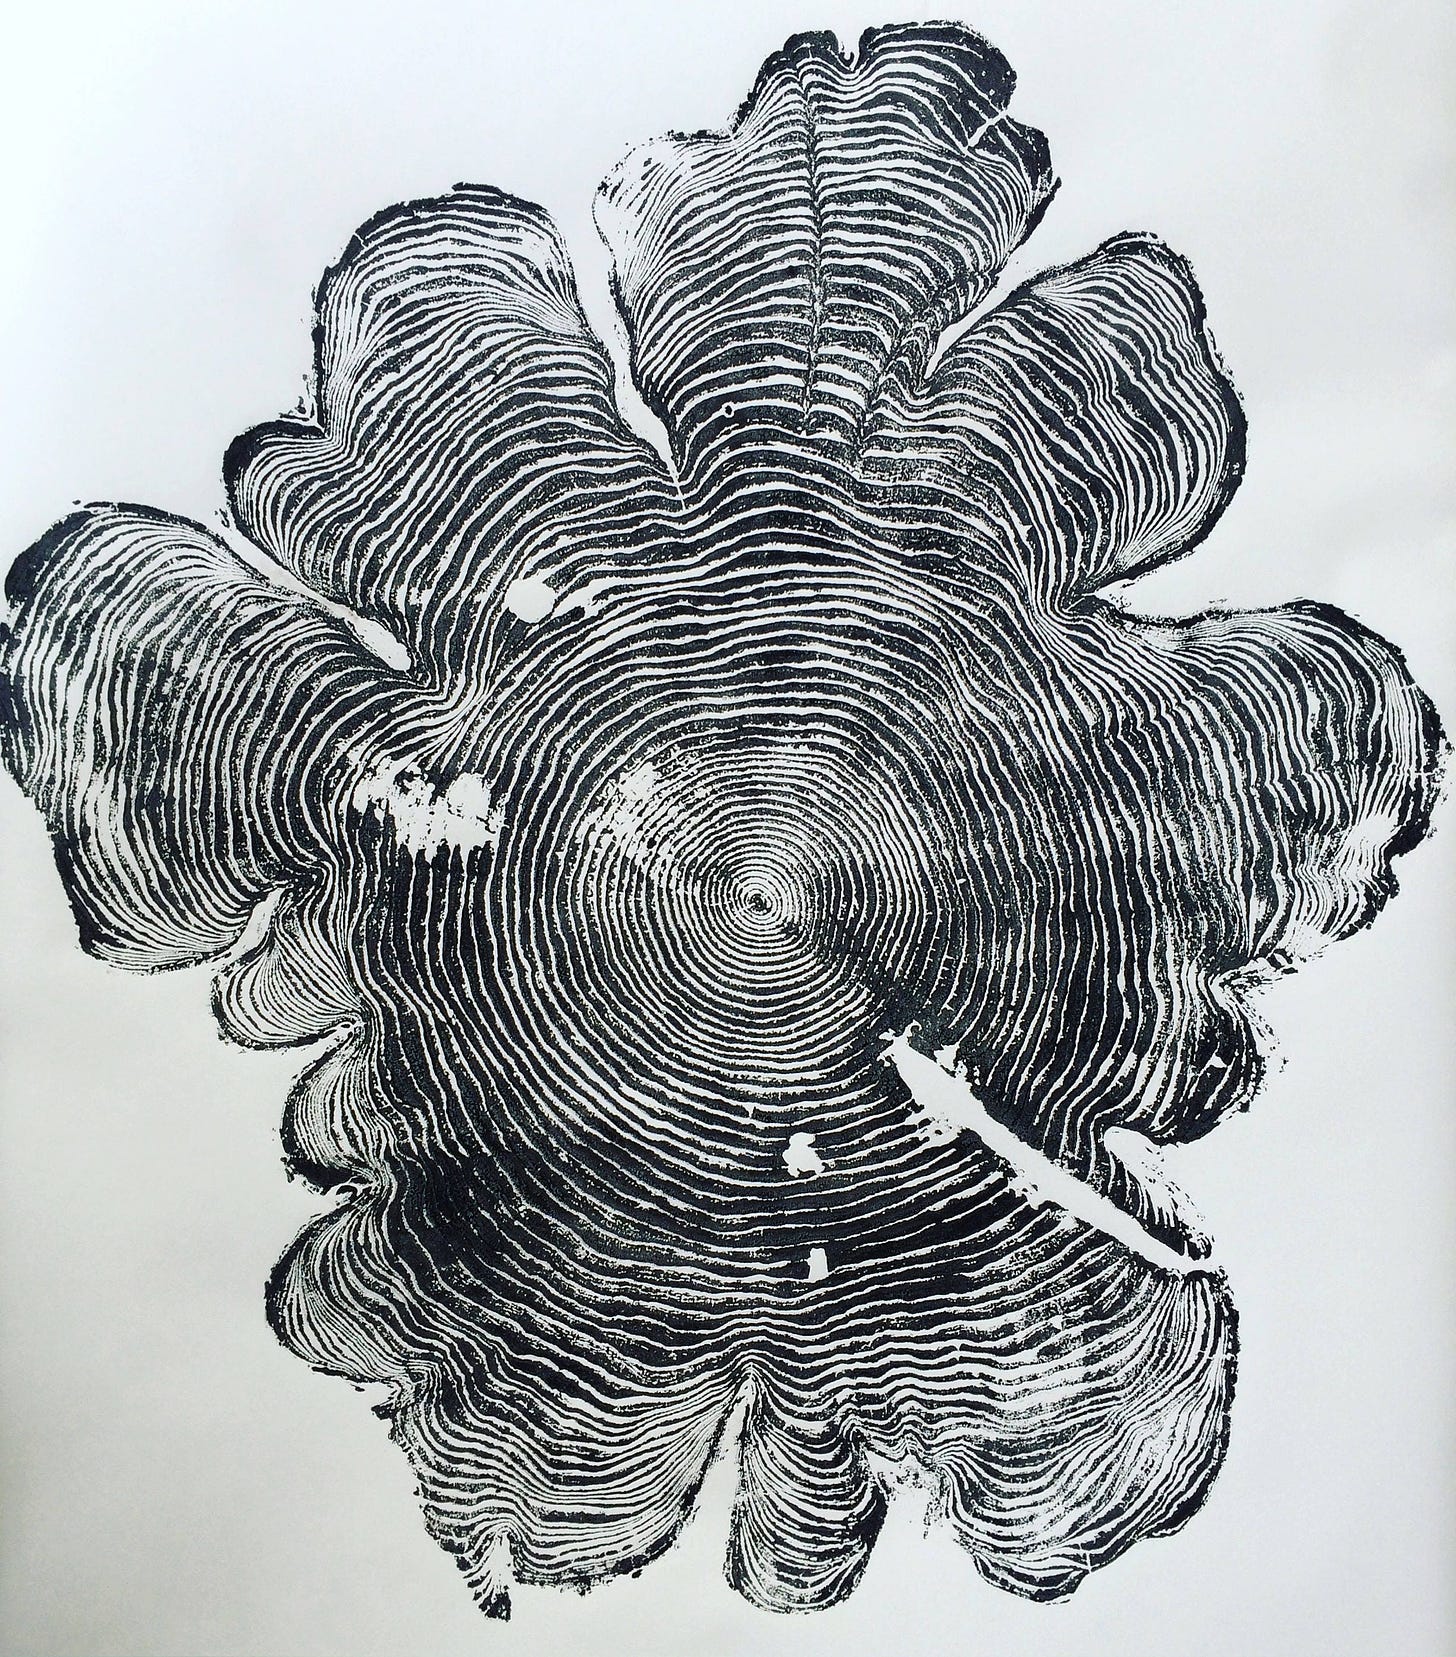 A black and white print made from a tree, with clear white rings showing the growth over time